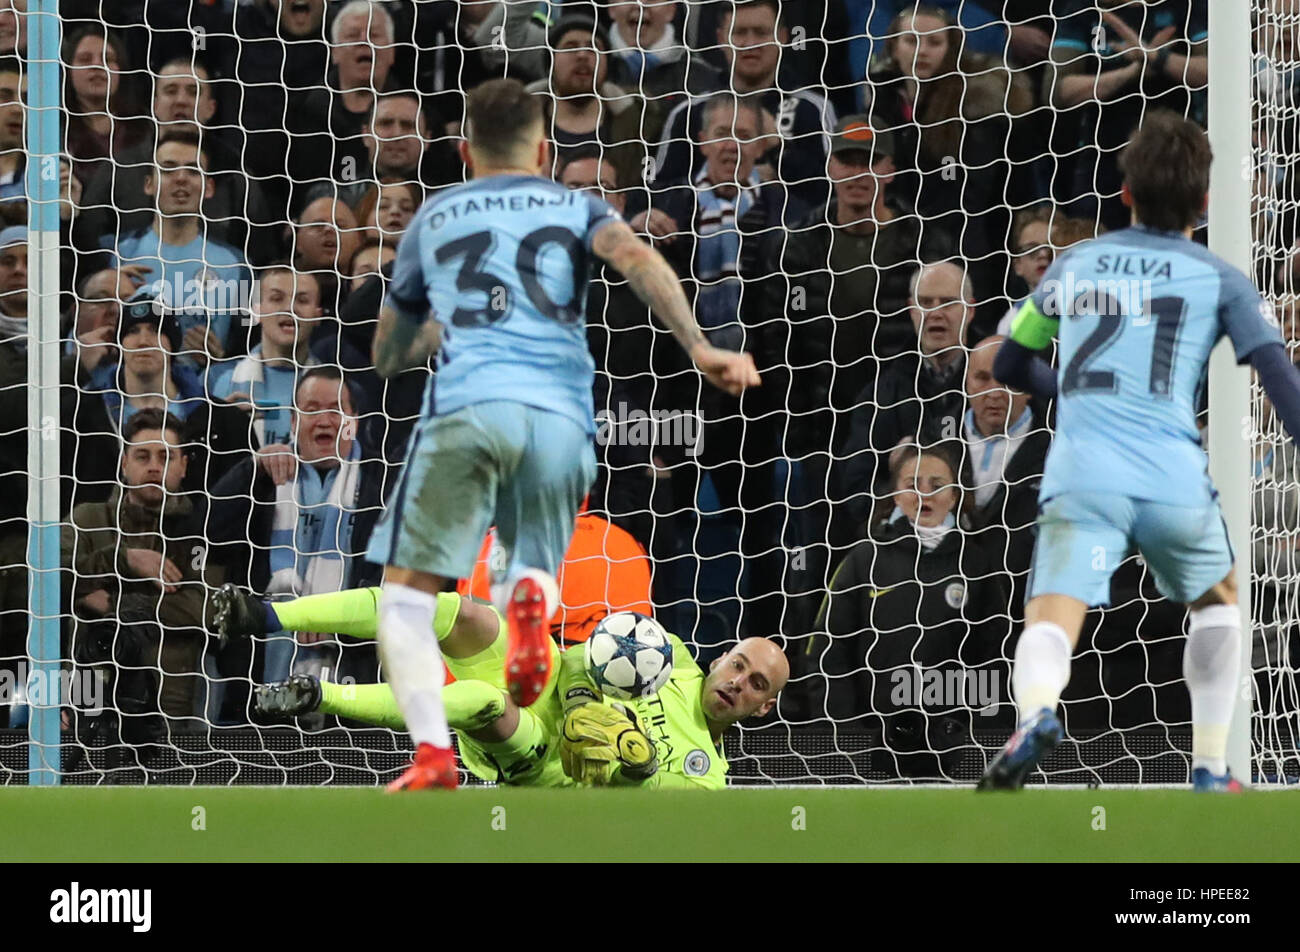 Manchester City goalkeeper Willy Caballero save a penalty from Monaco's Radamel Falcao during the UEFA Champions League match at the Etihad Stadium, Manchester. Stock Photo